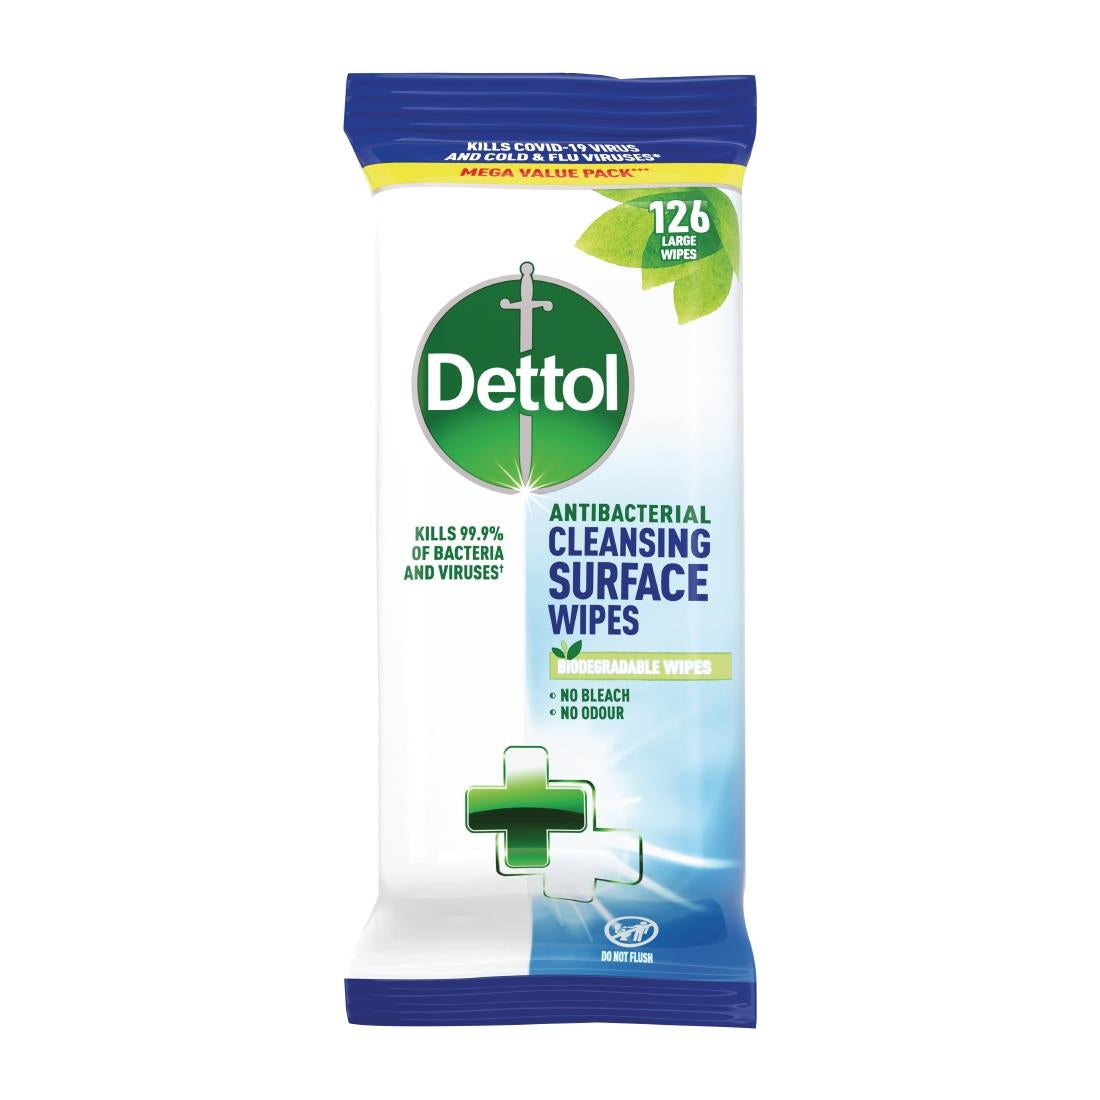 FT011 Dettol Antibacterial Surface Cleaning Wipes (Pack of 126) JD Catering Equipment Solutions Ltd